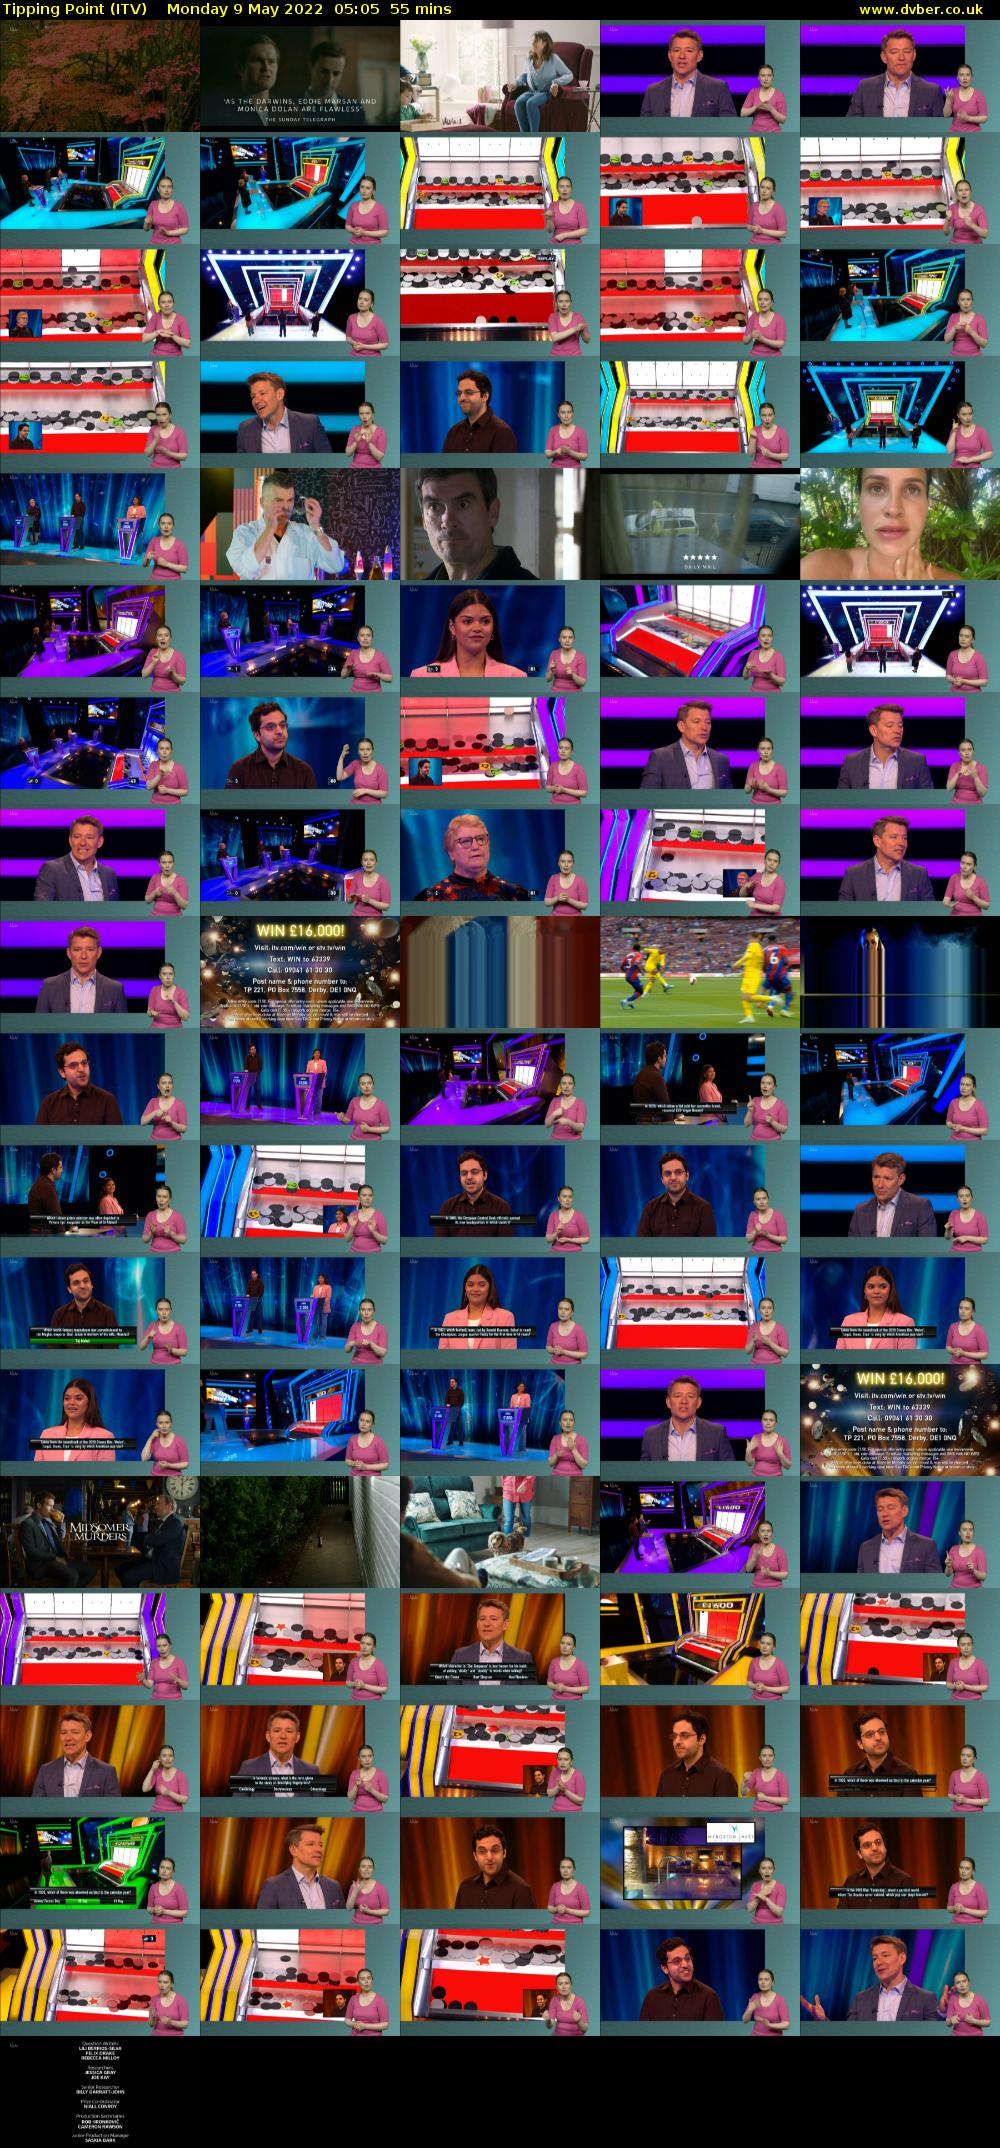 Tipping Point (ITV) 202205090505